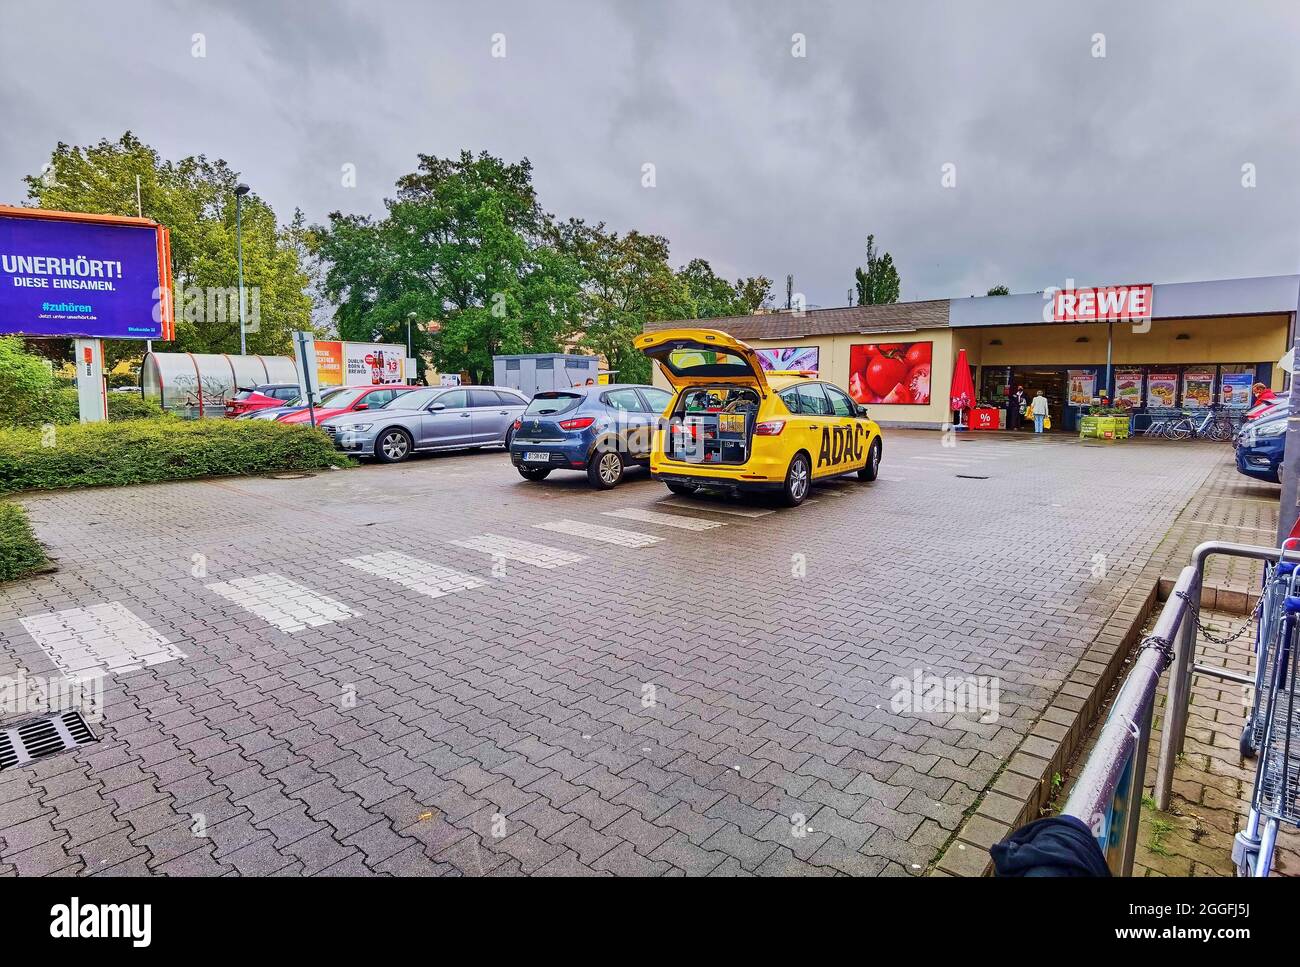 Berlin, Germany - August 30, 2021: Emergency vehicle of the automobile club ADAC in a supermarket parking lot. Stock Photo